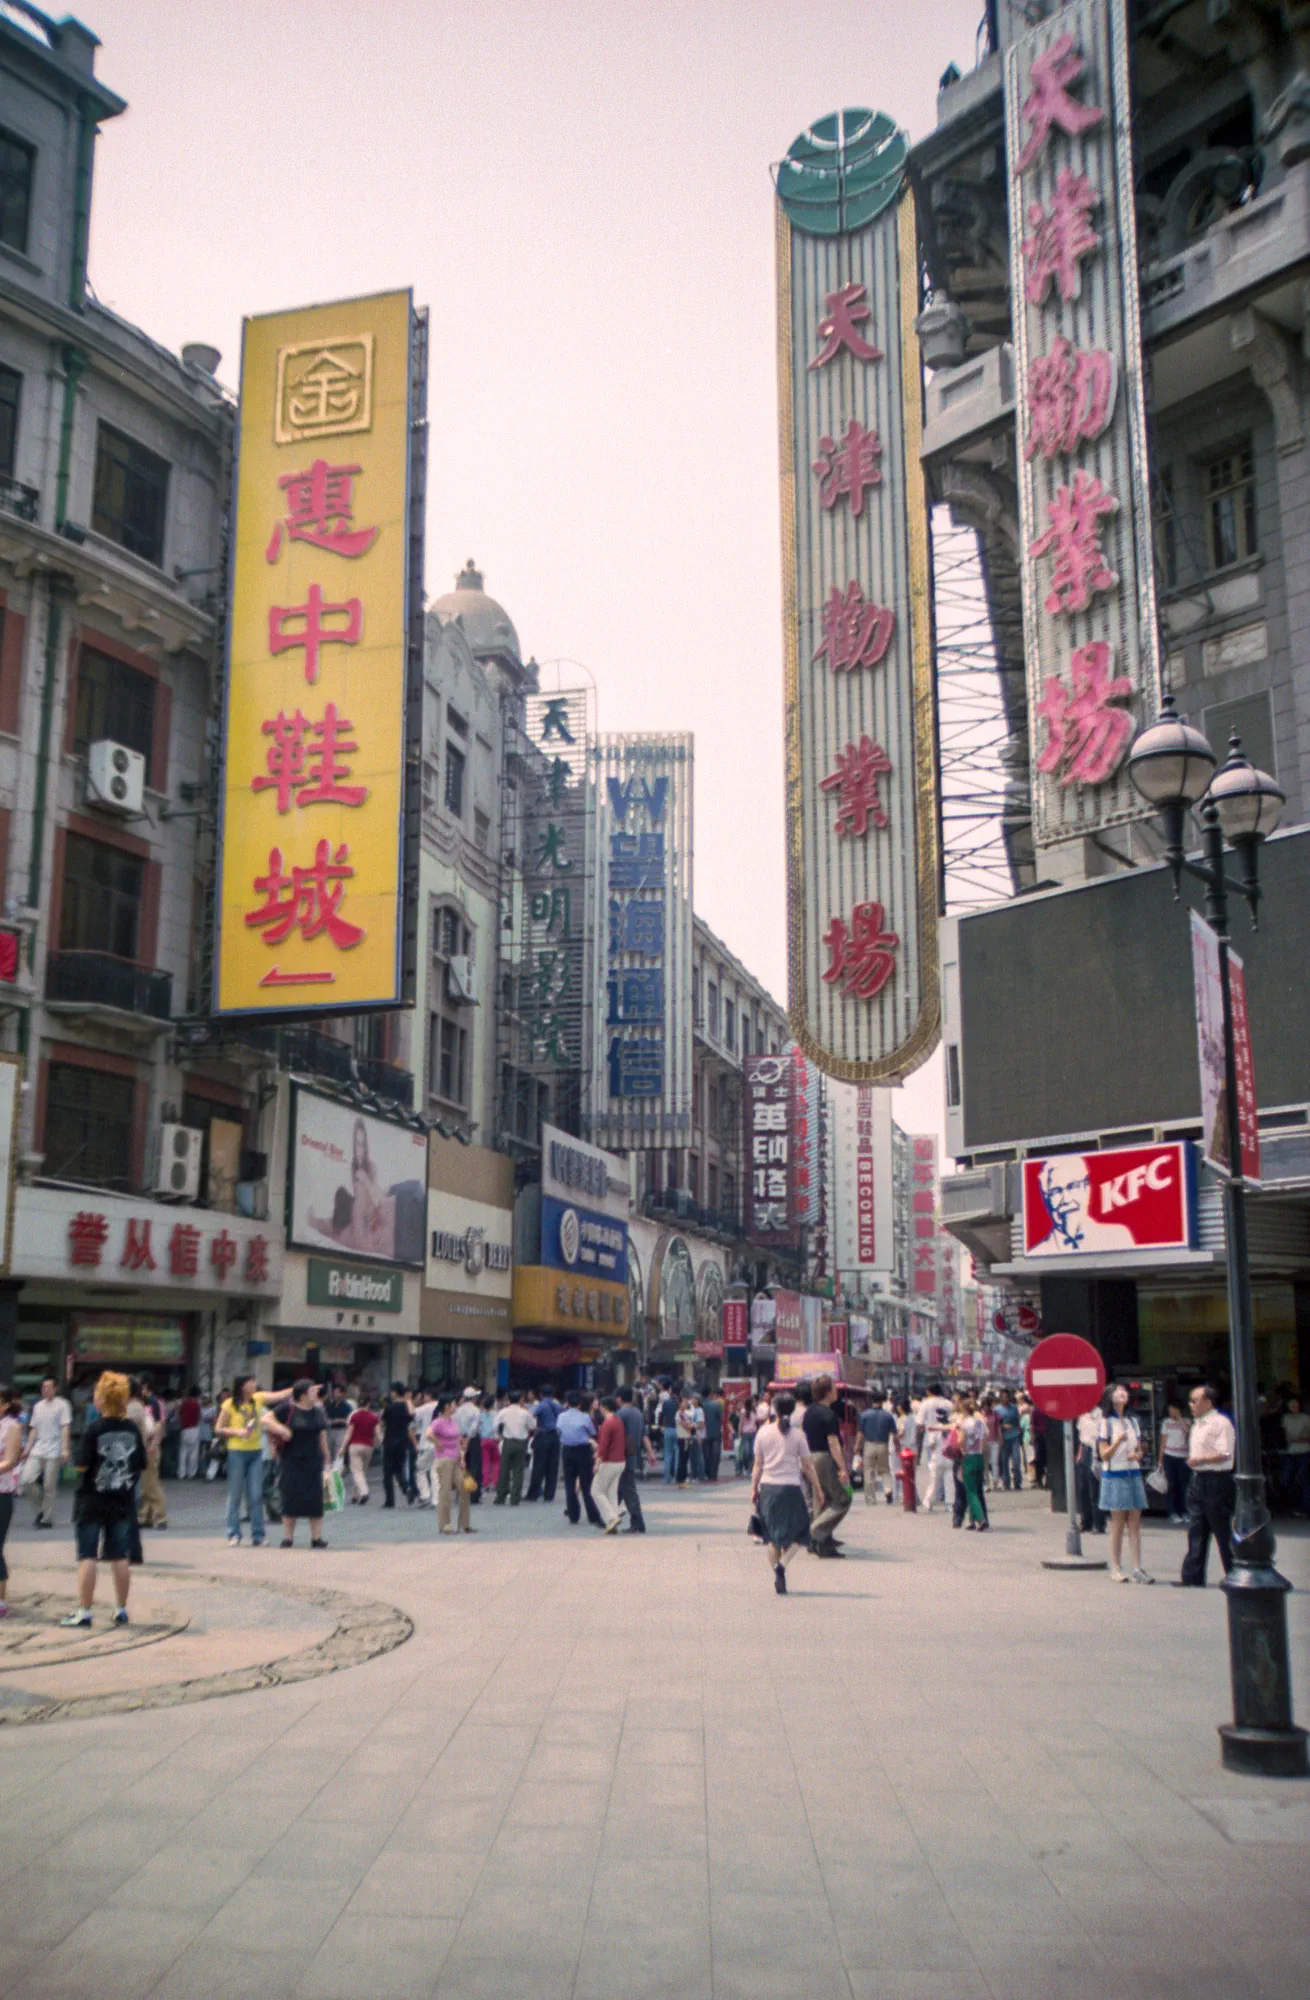 Stores on Heping Road